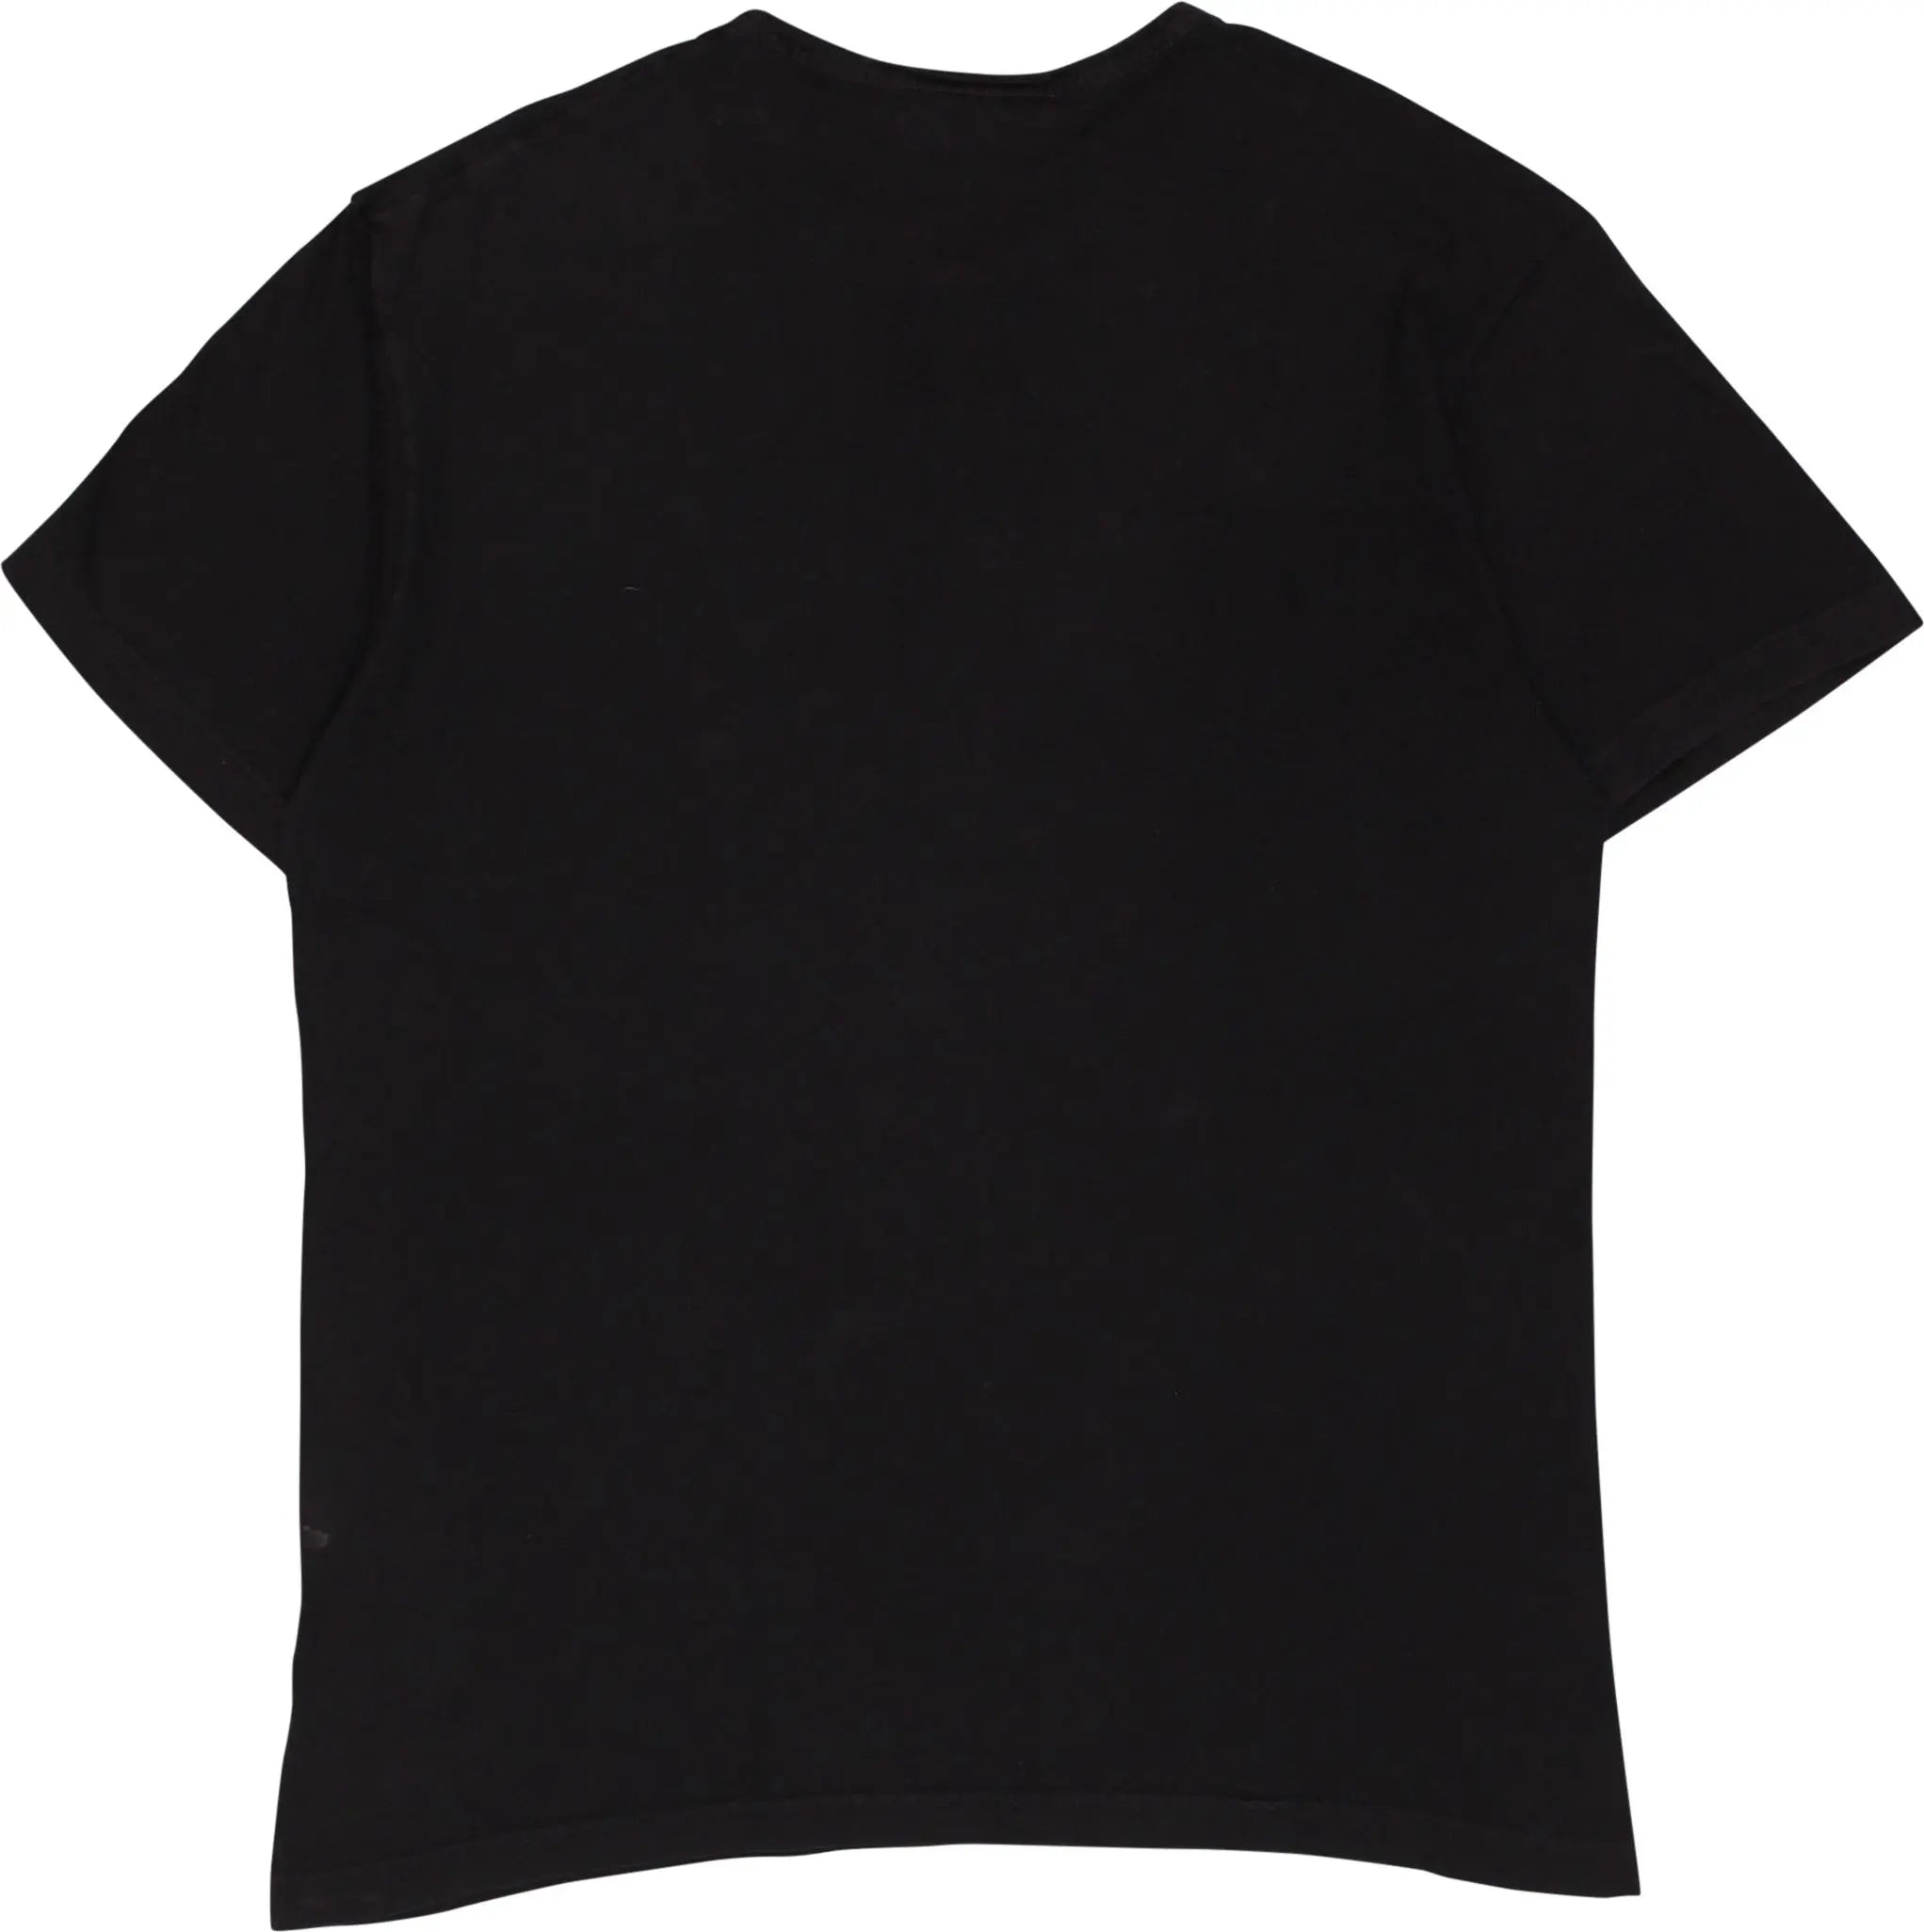 Trussardi - Black T-shirt by Trussardi Jeans- ThriftTale.com - Vintage and second handclothing